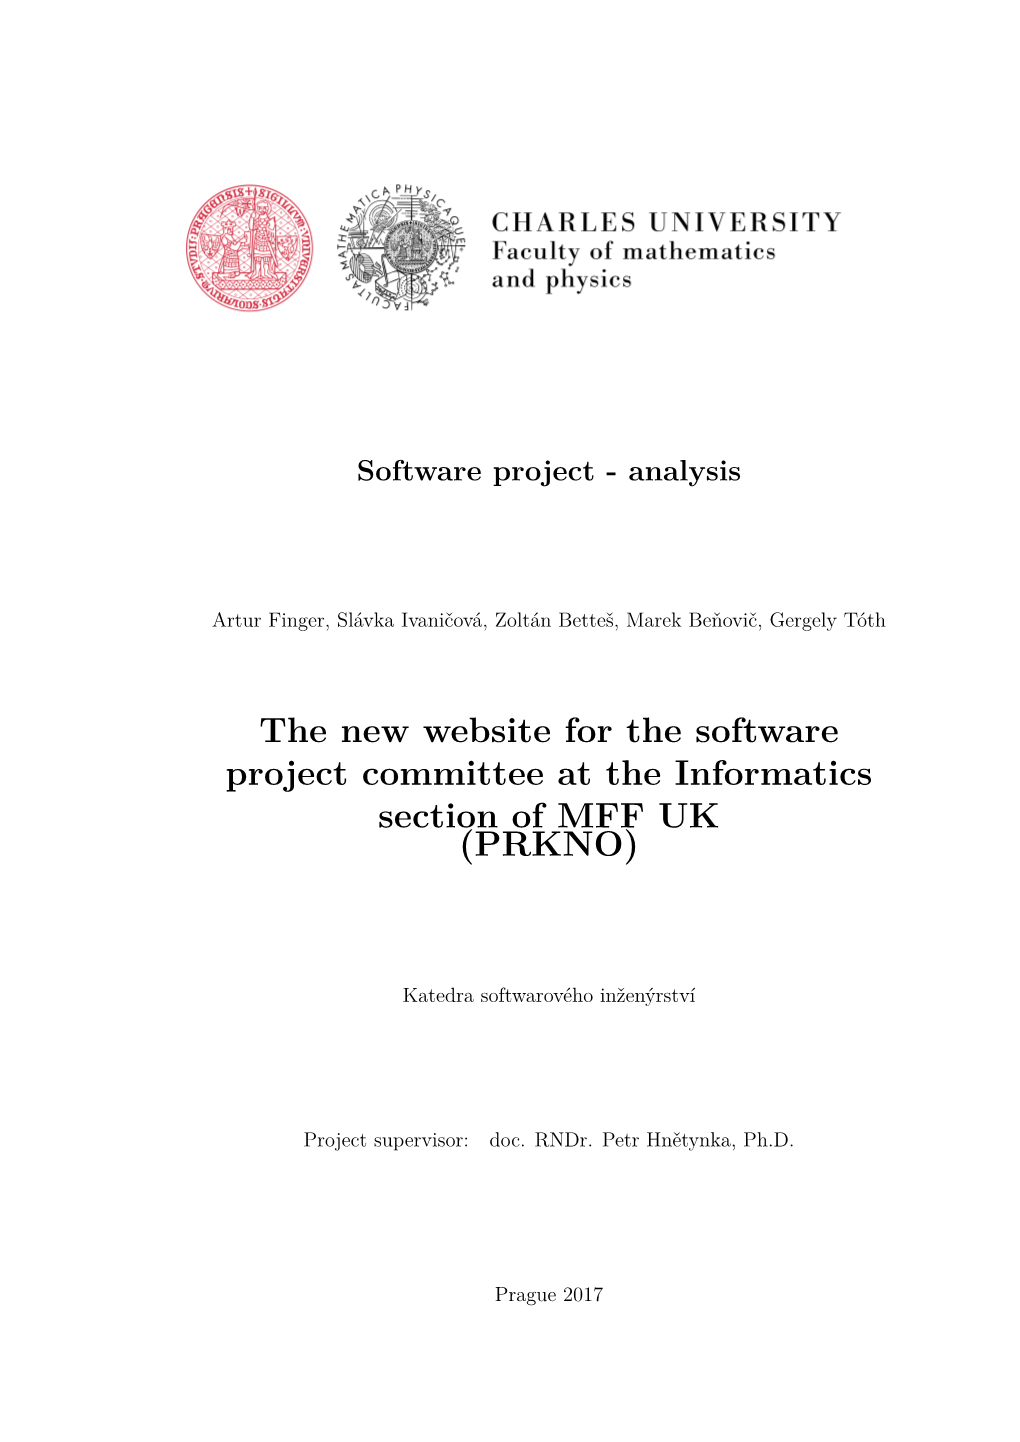 The New Website for the Software Project Committee at the Informatics Section of MFF UK (PRKNO)